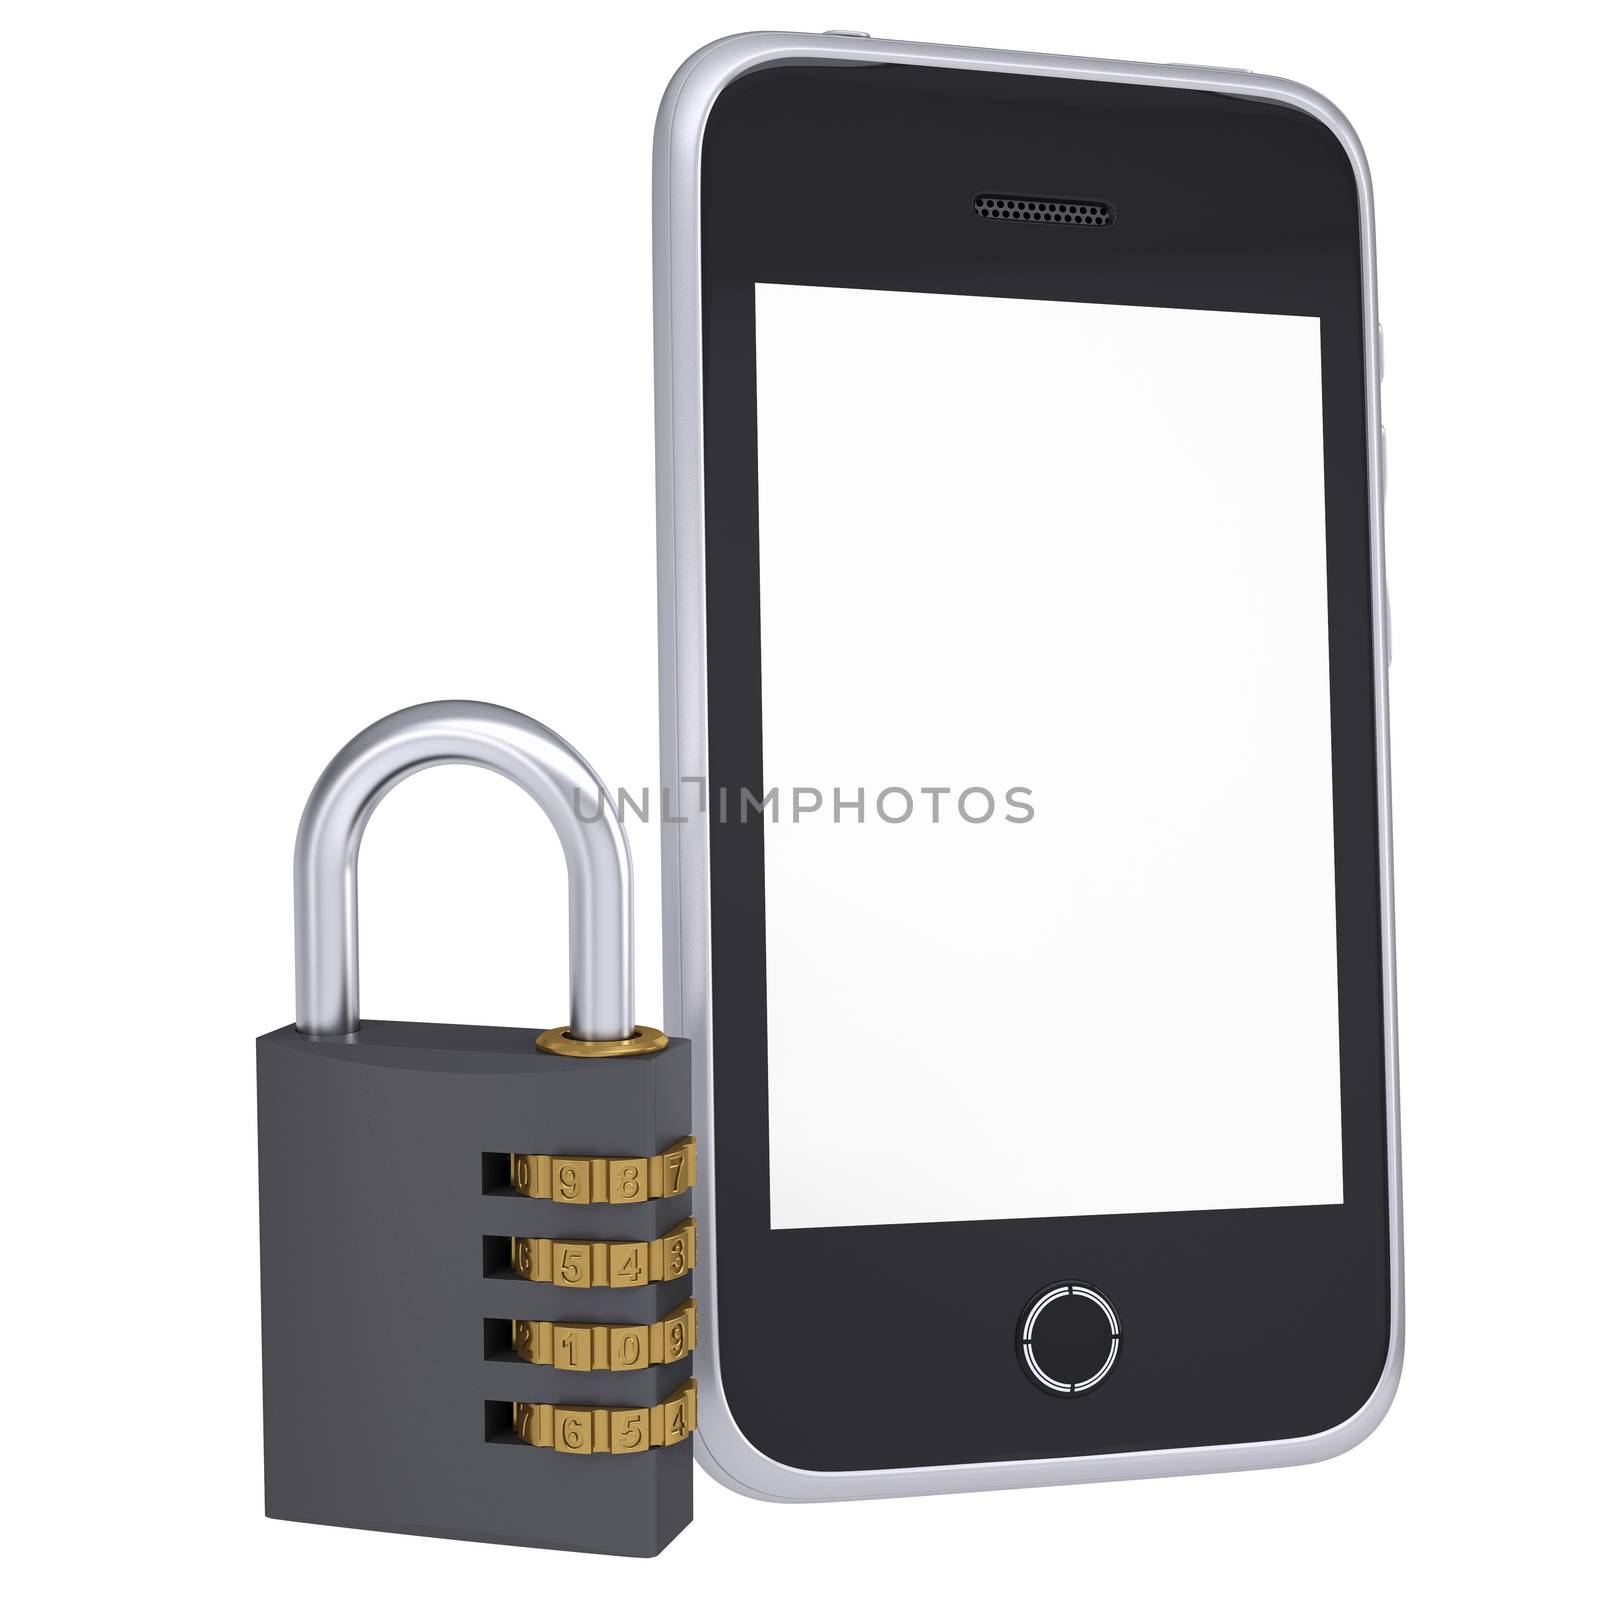 Code lock near smartphone. Isolated render on a white background